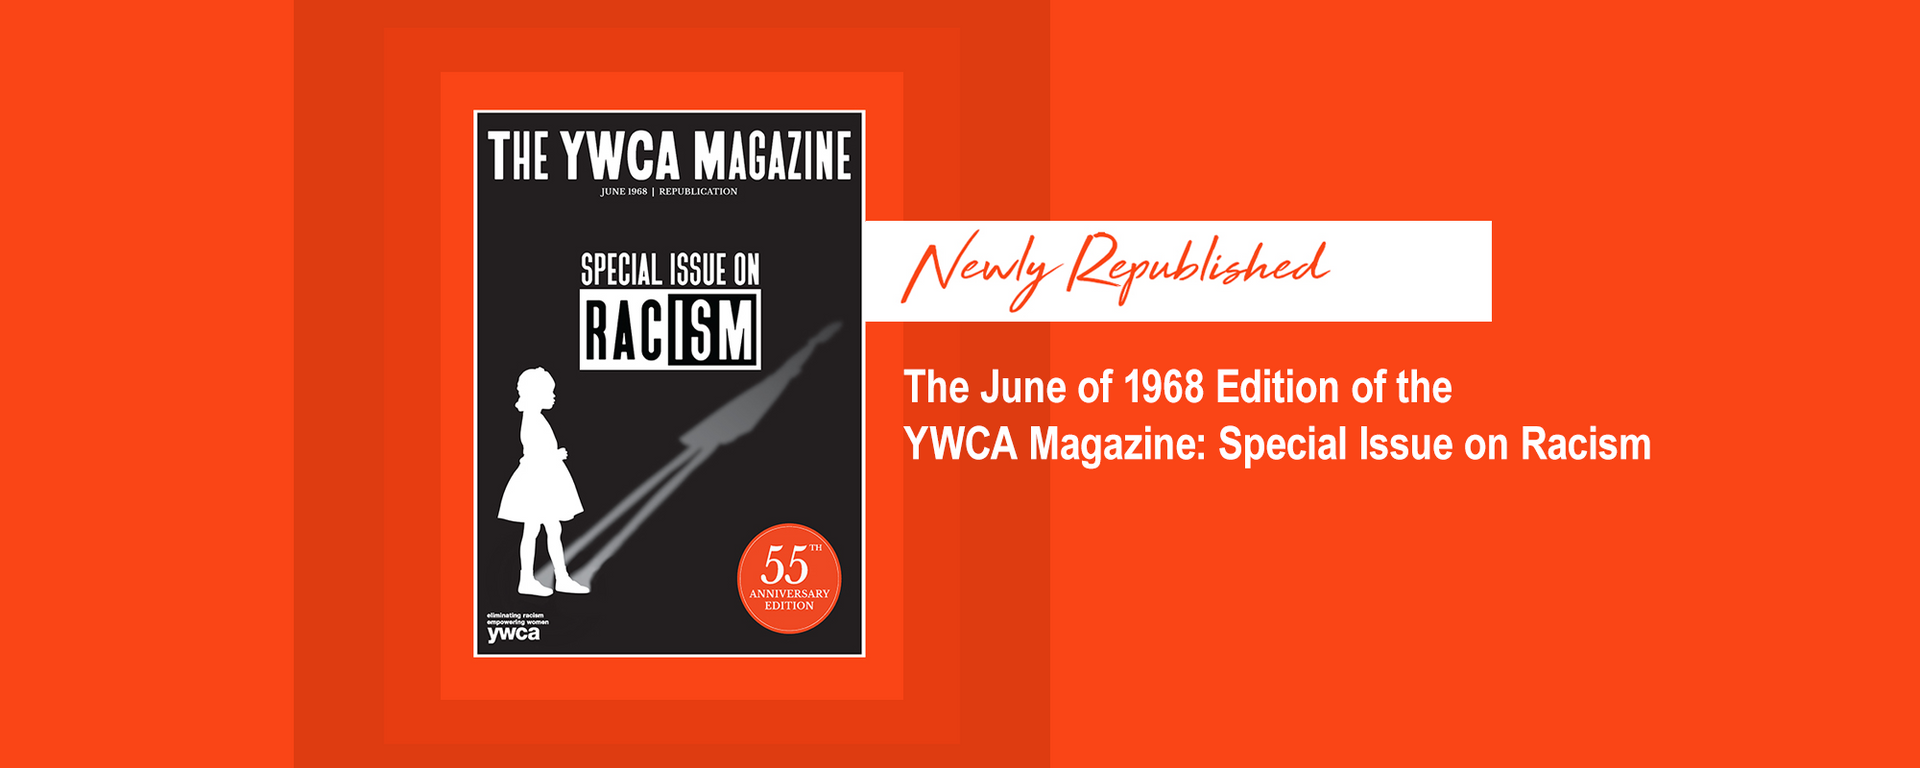 Image of 1968 Edition of the YWCA Magazine: Special Issue on Racism